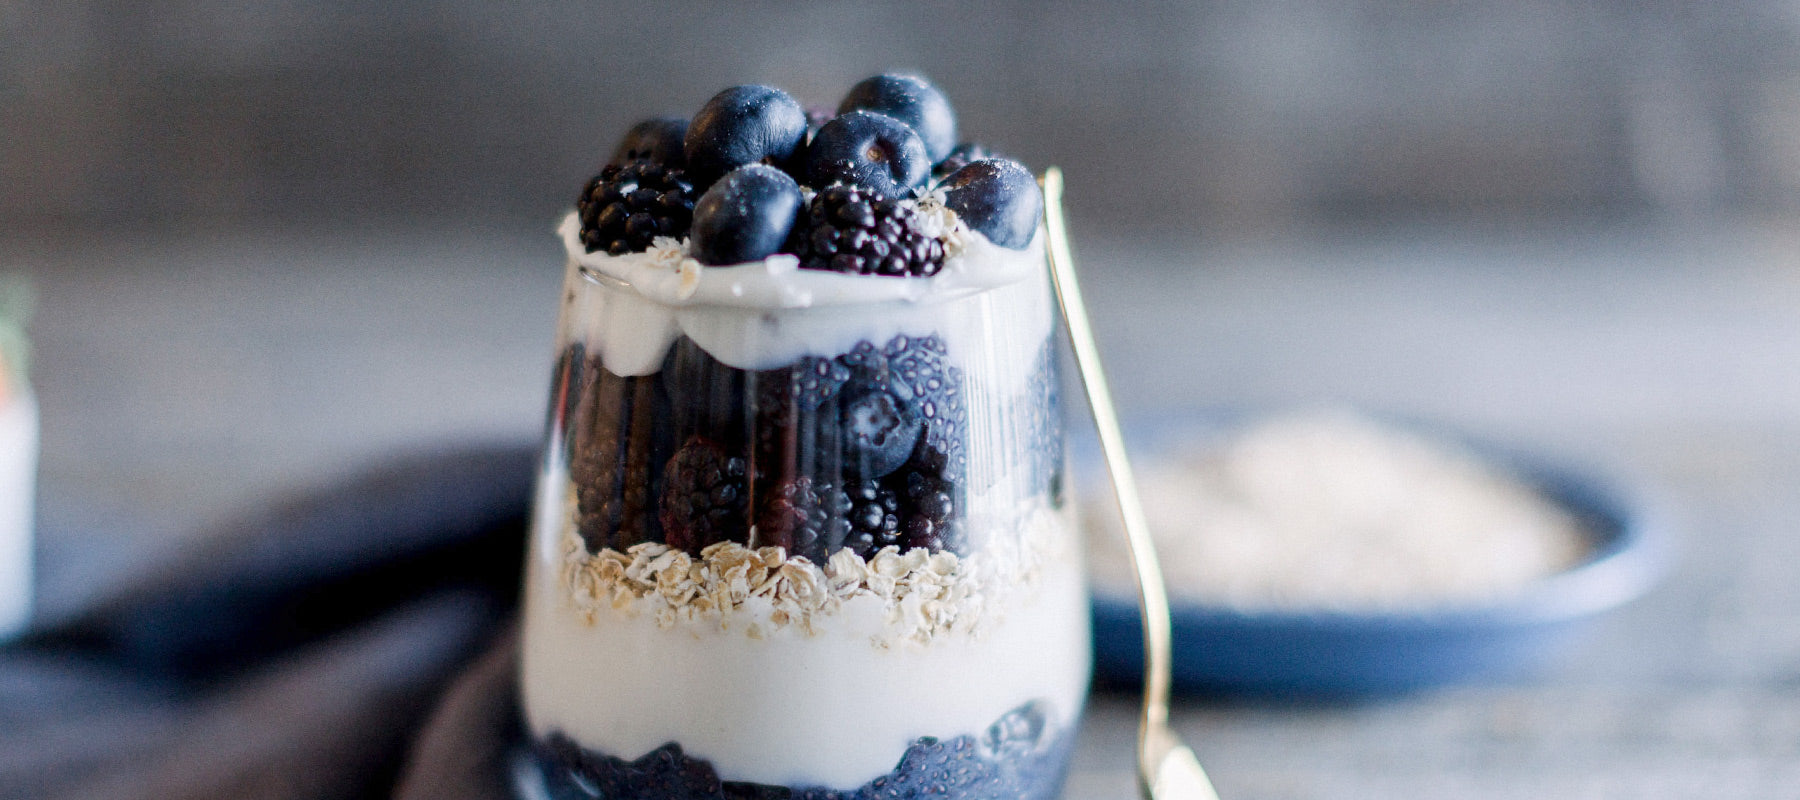 Blackberry Blueberry Parfait by Amber Approved